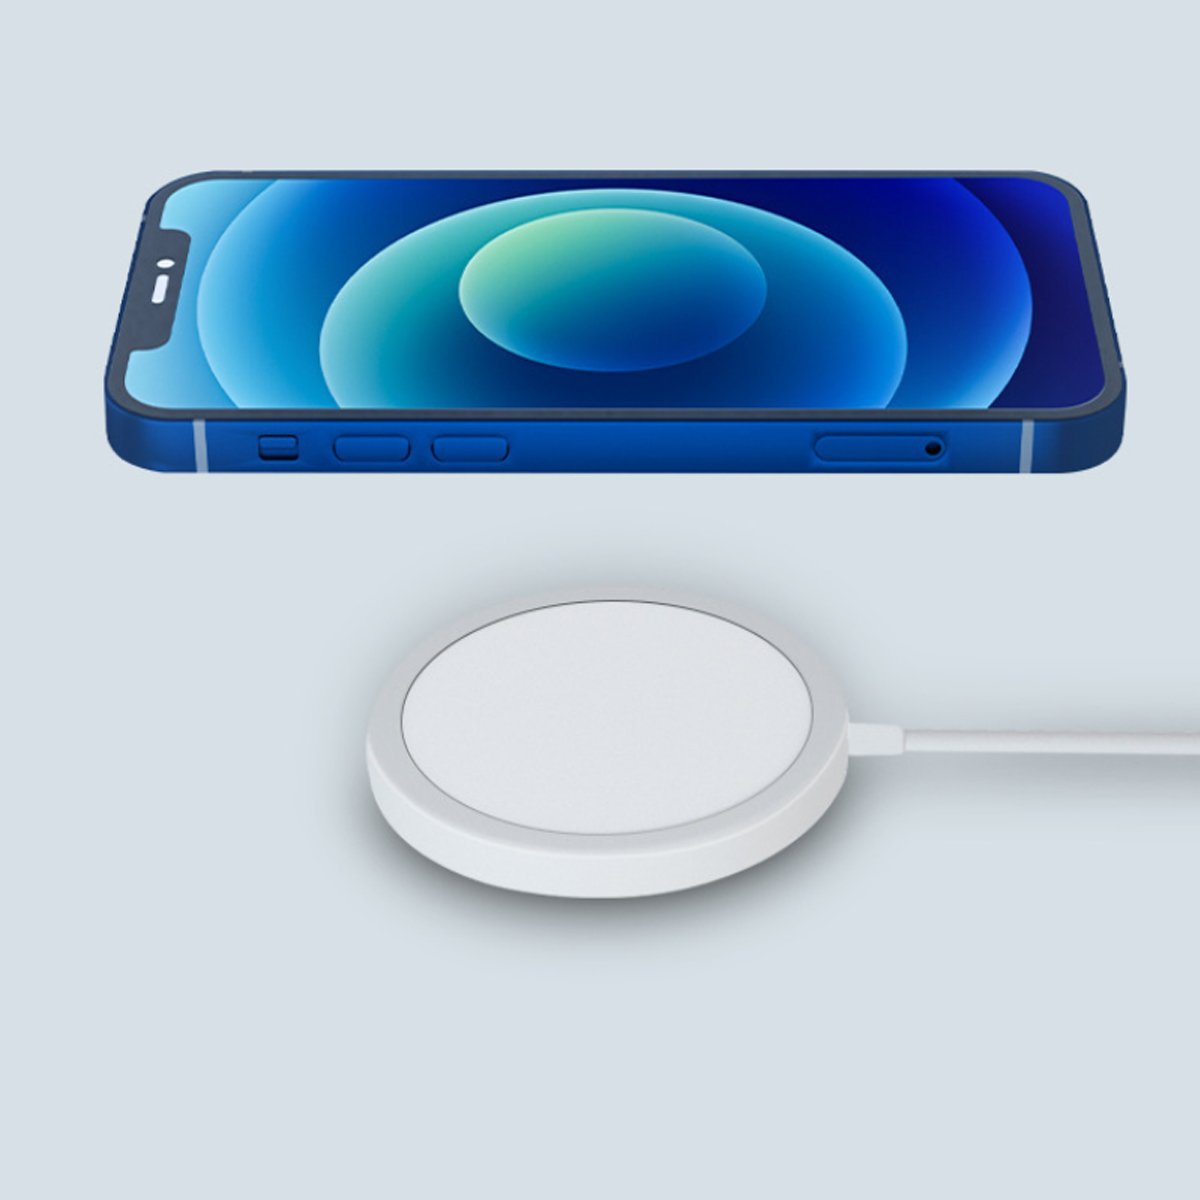 The Missing Magnetic Wireless Charger for iPhone 12